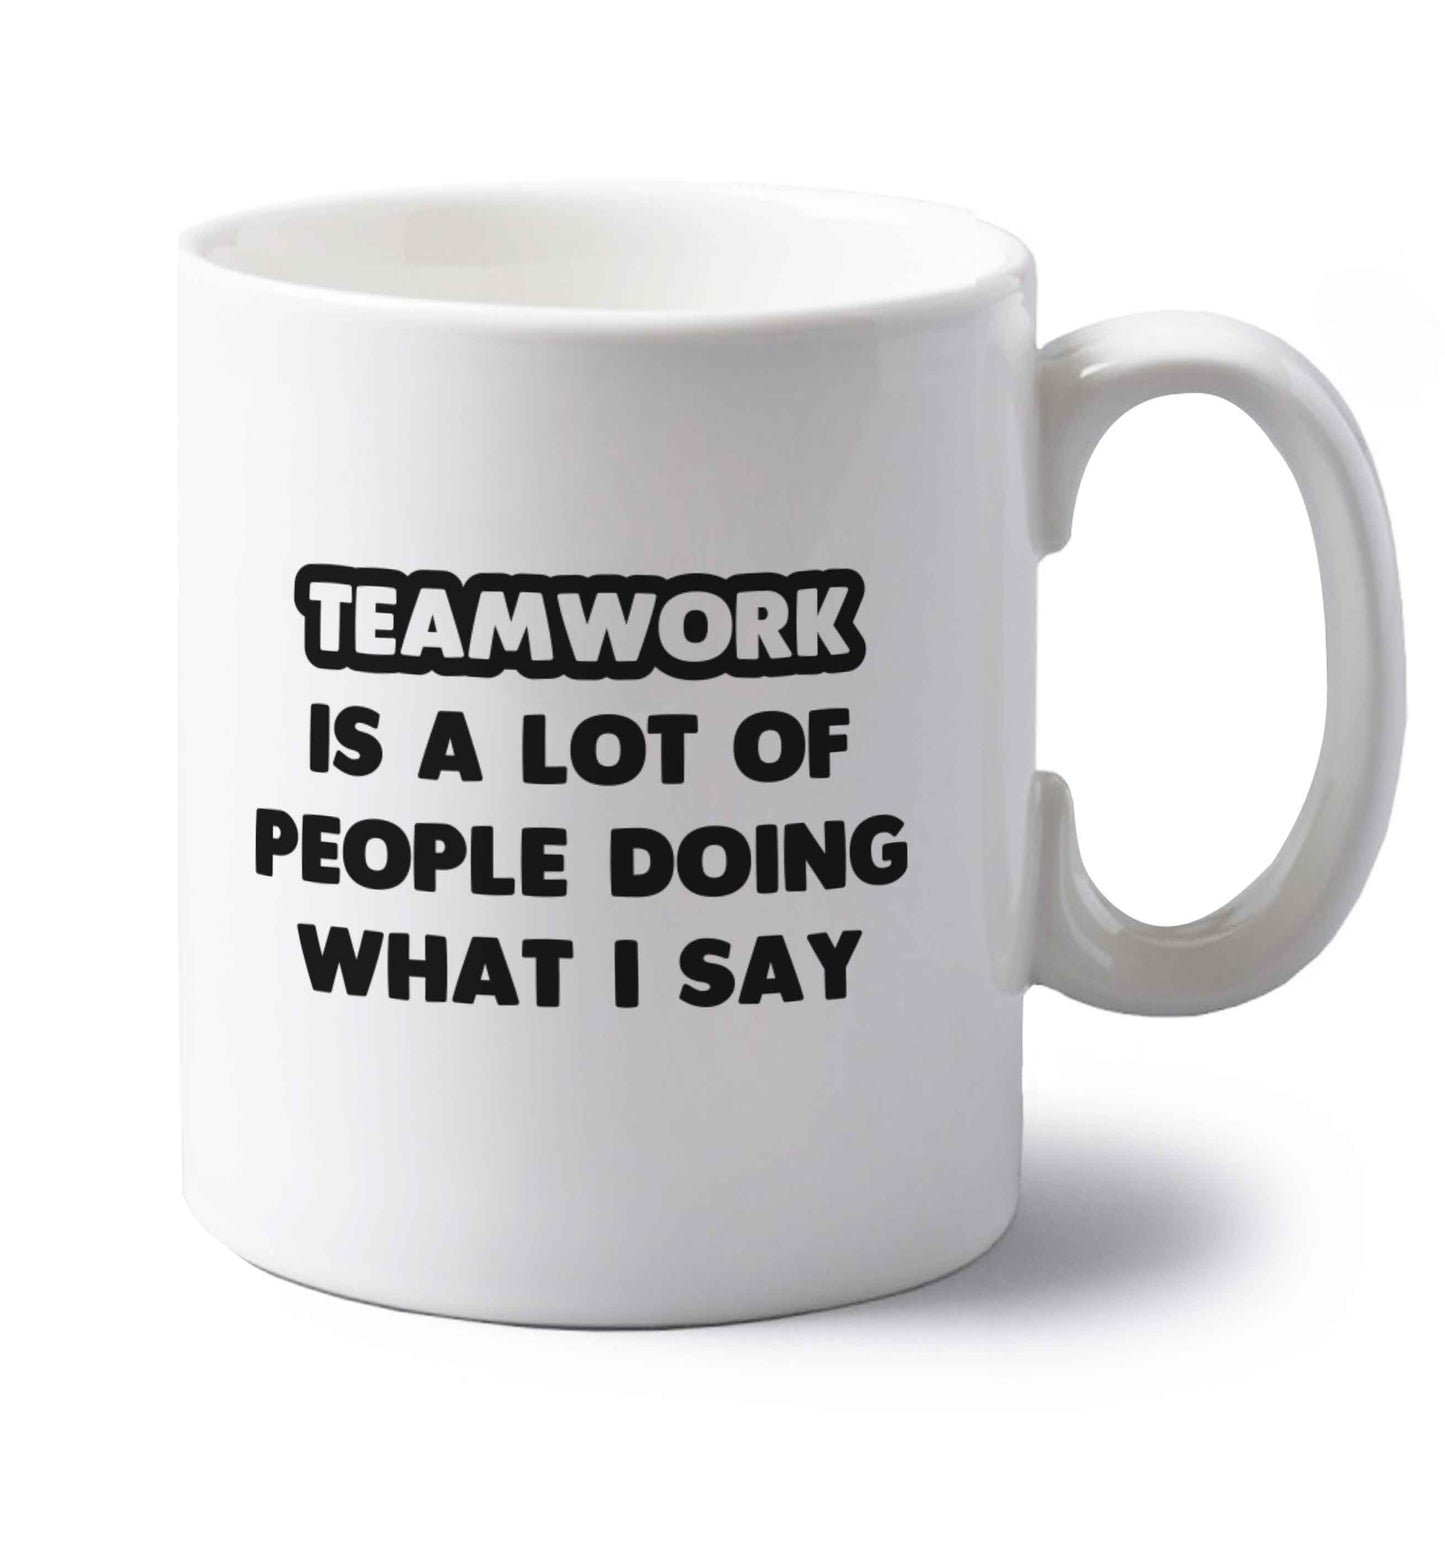 Teamwork is a lot of people doing what I say left handed white ceramic mug 